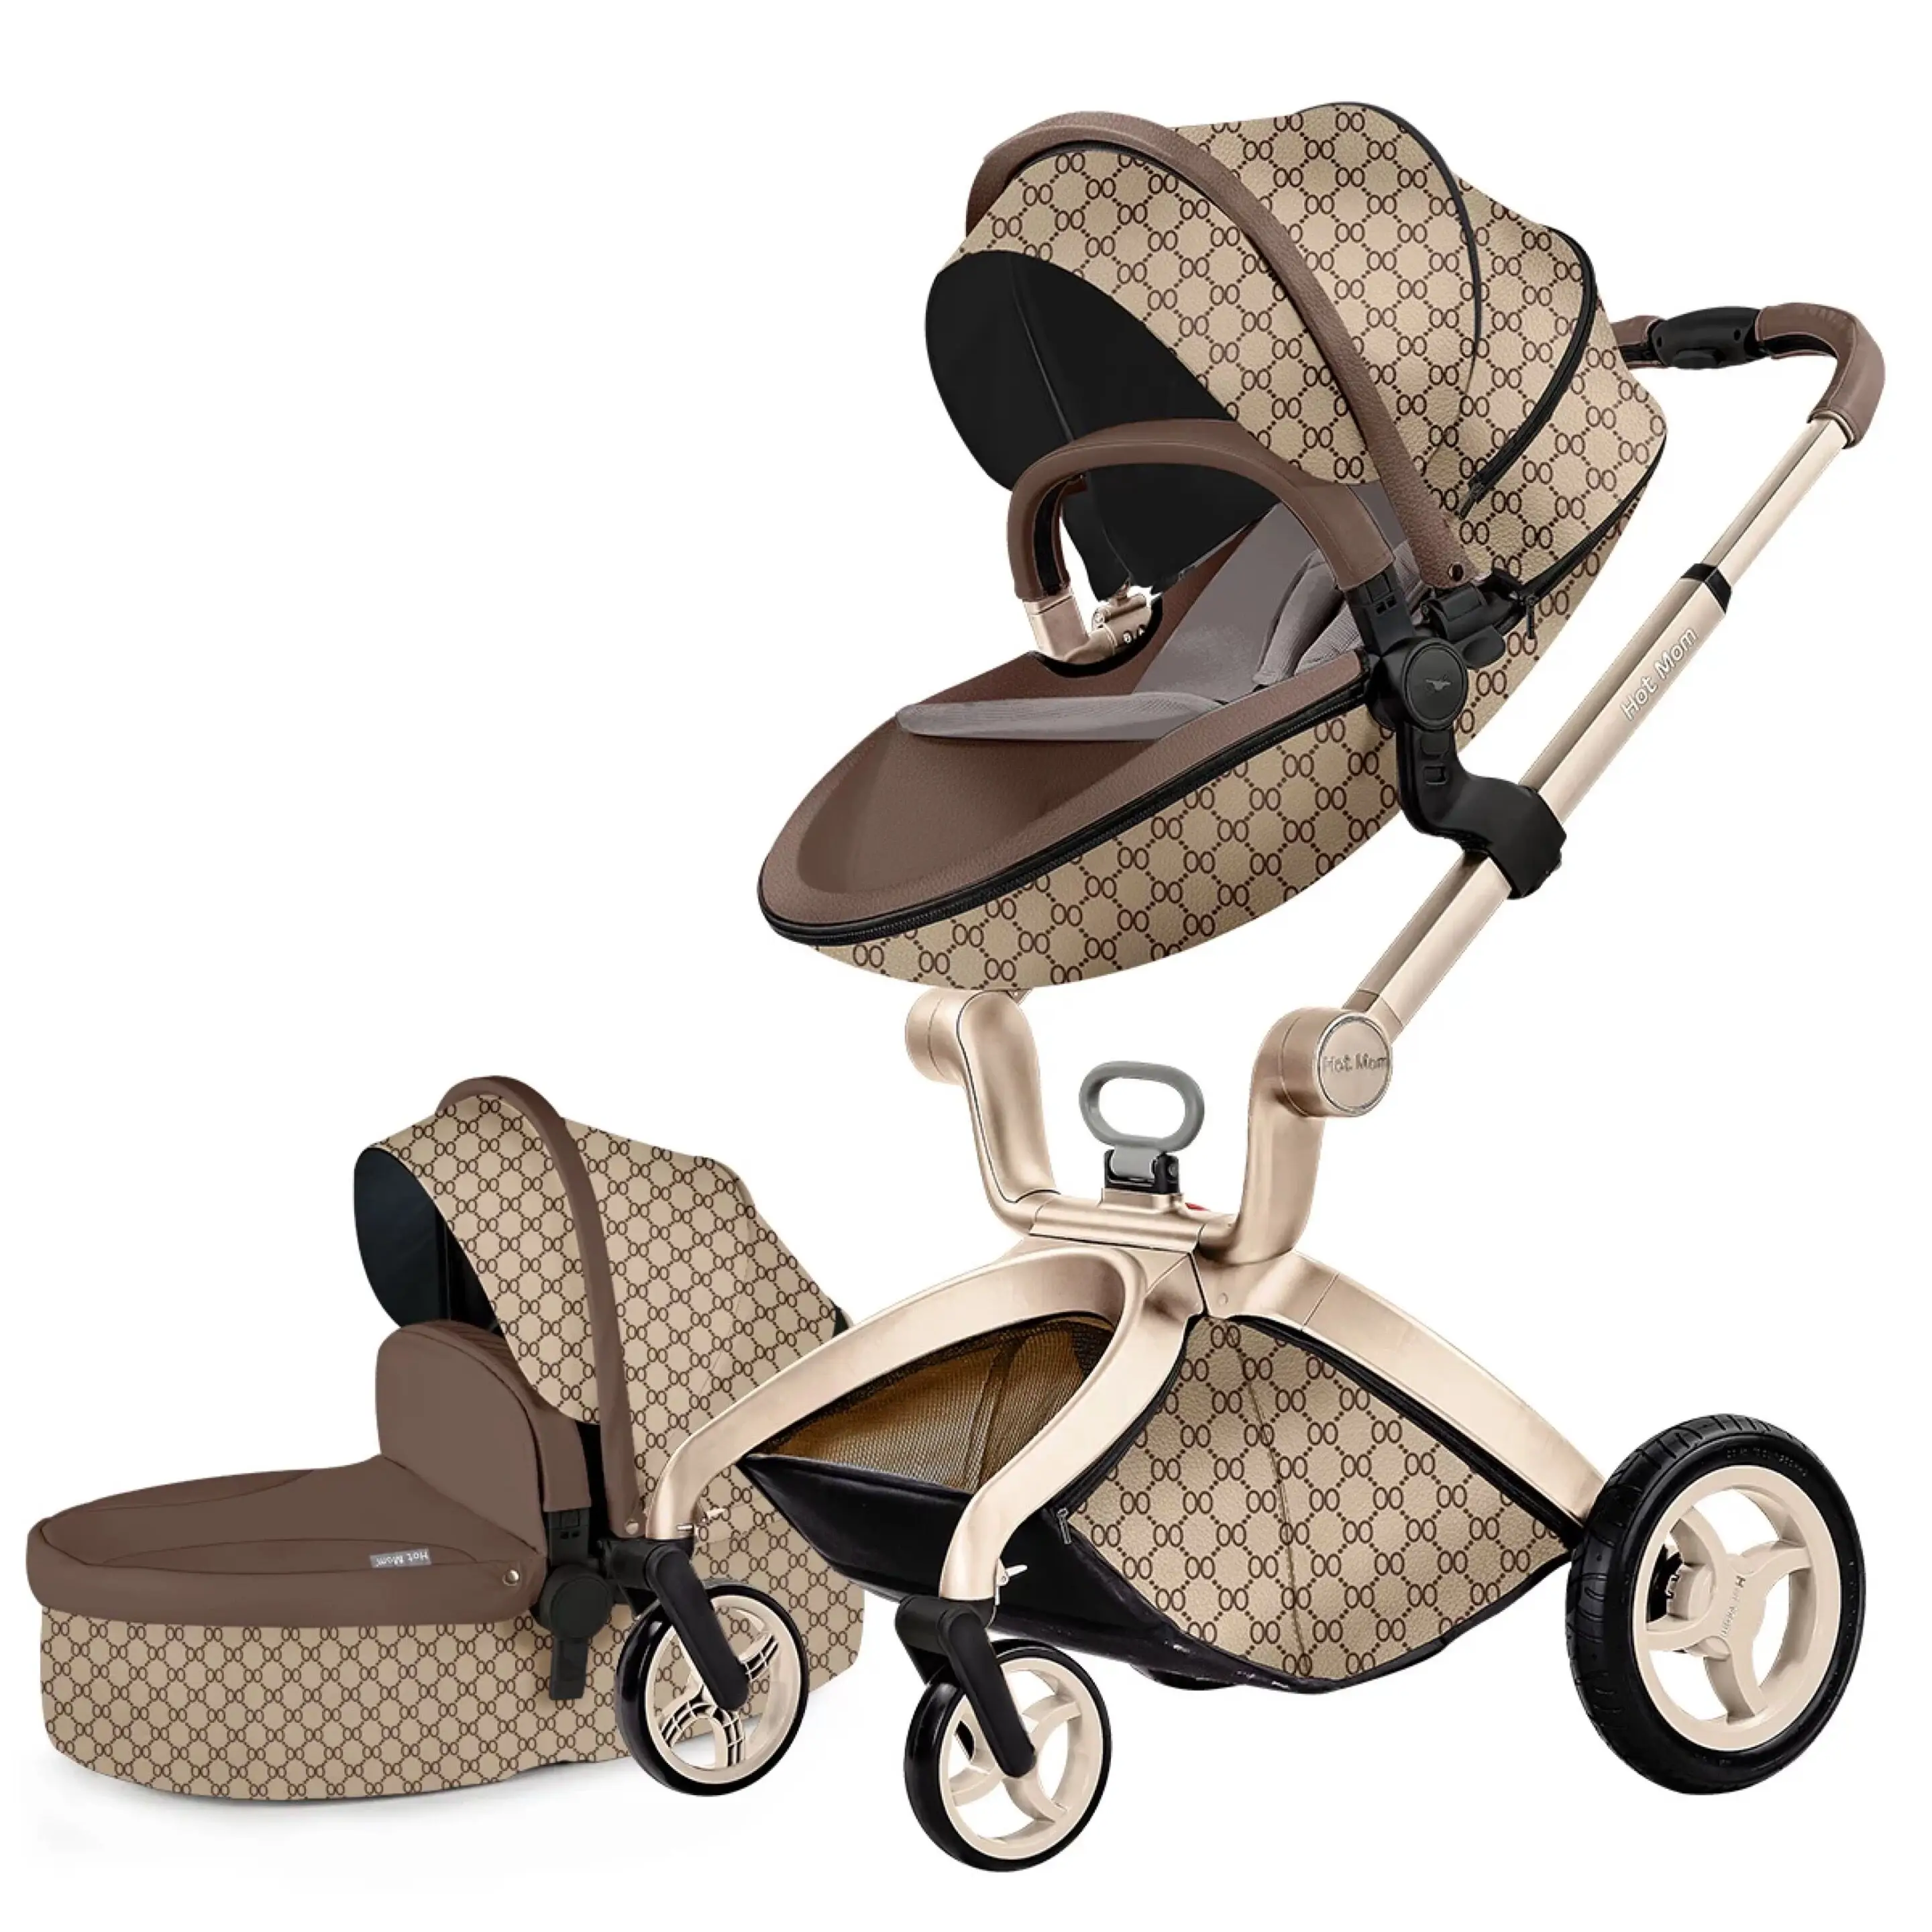 2020 baby strollers